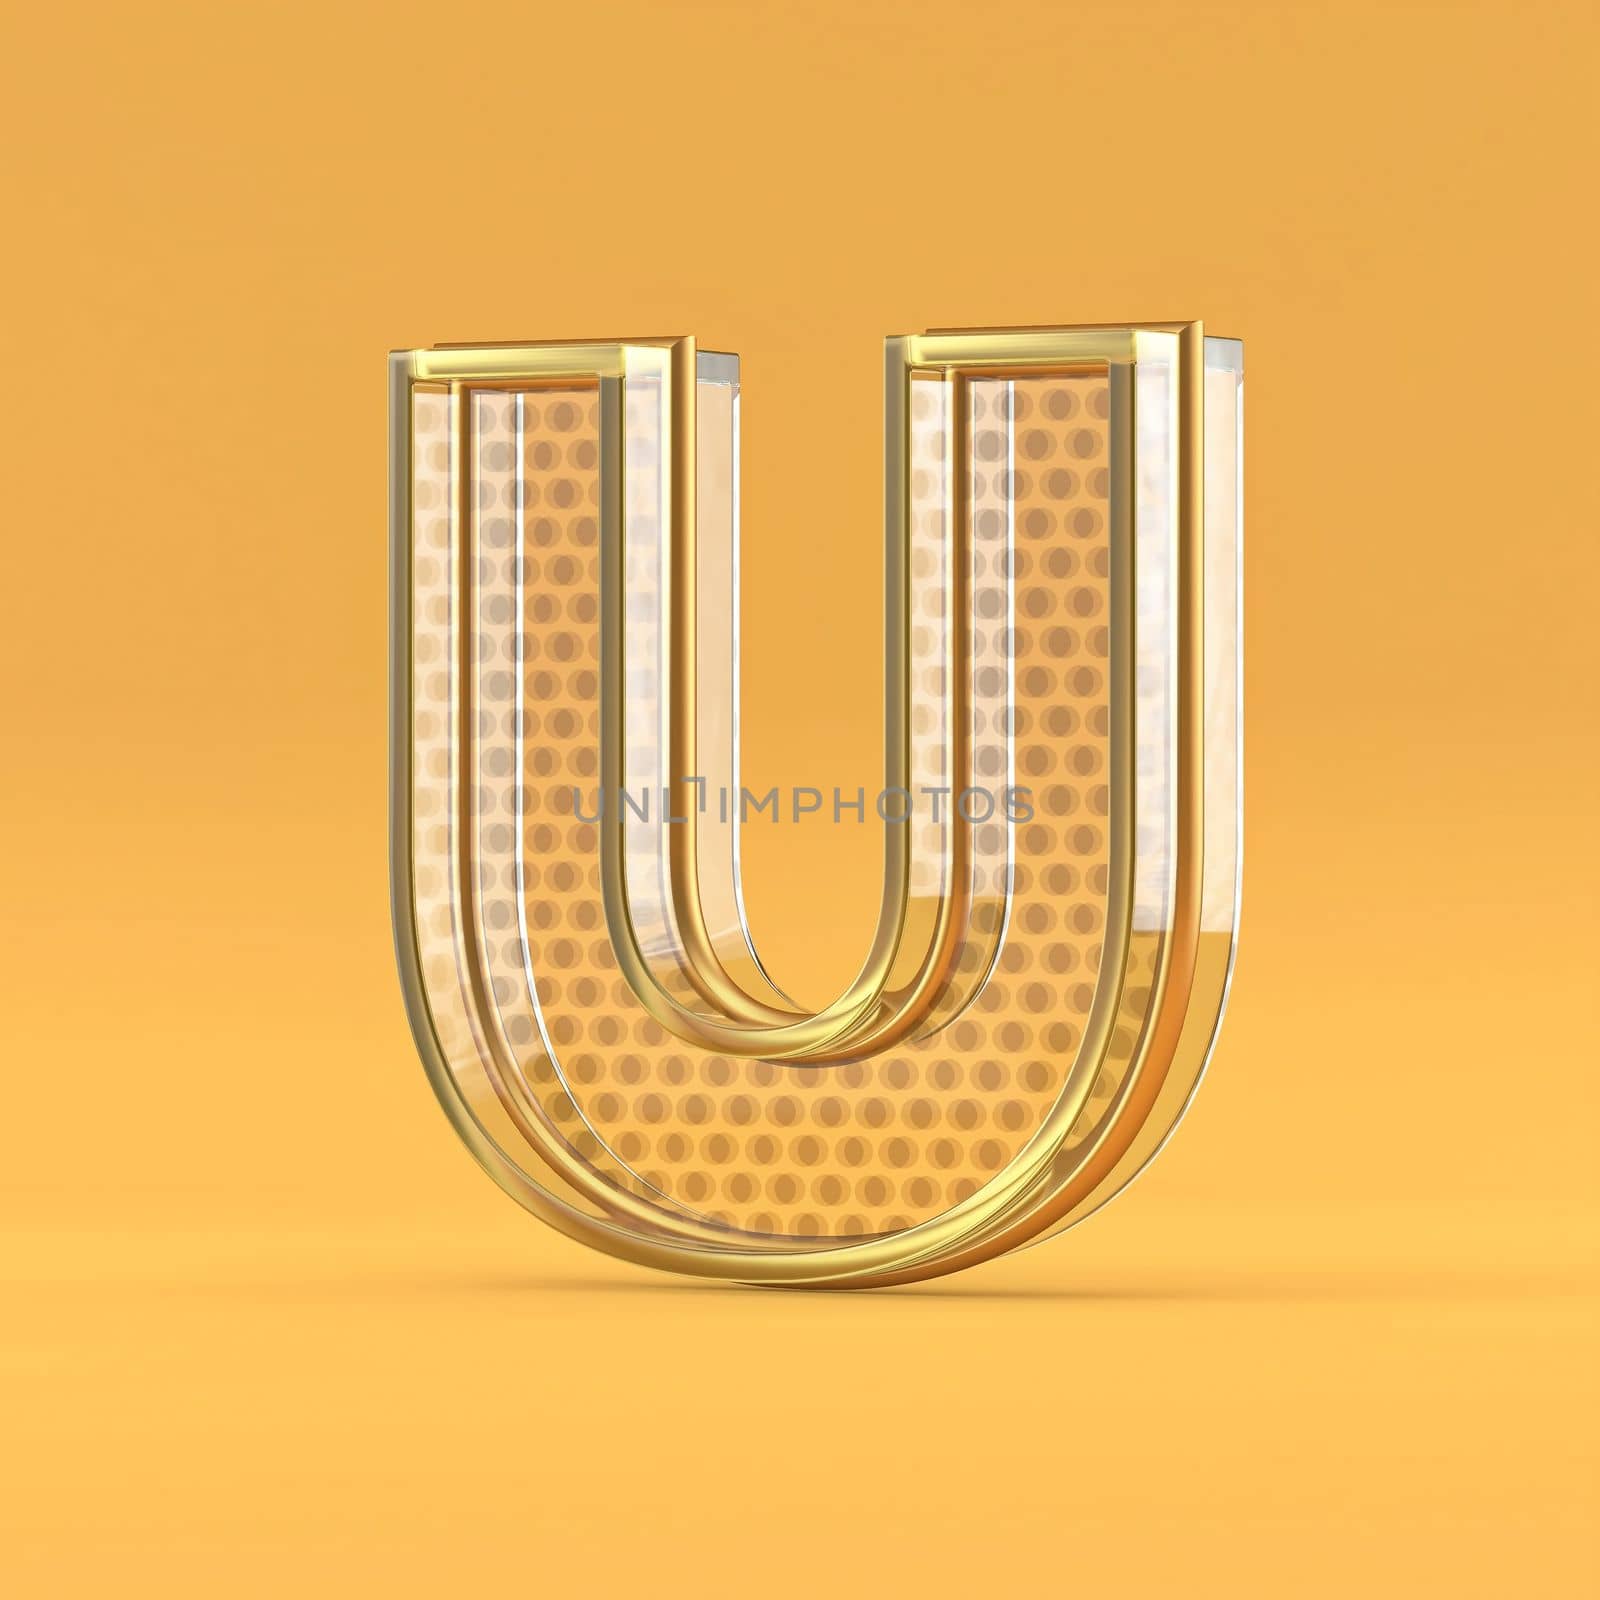 Gold wire and glass font letter U 3D rendering illustration isolated on orange background